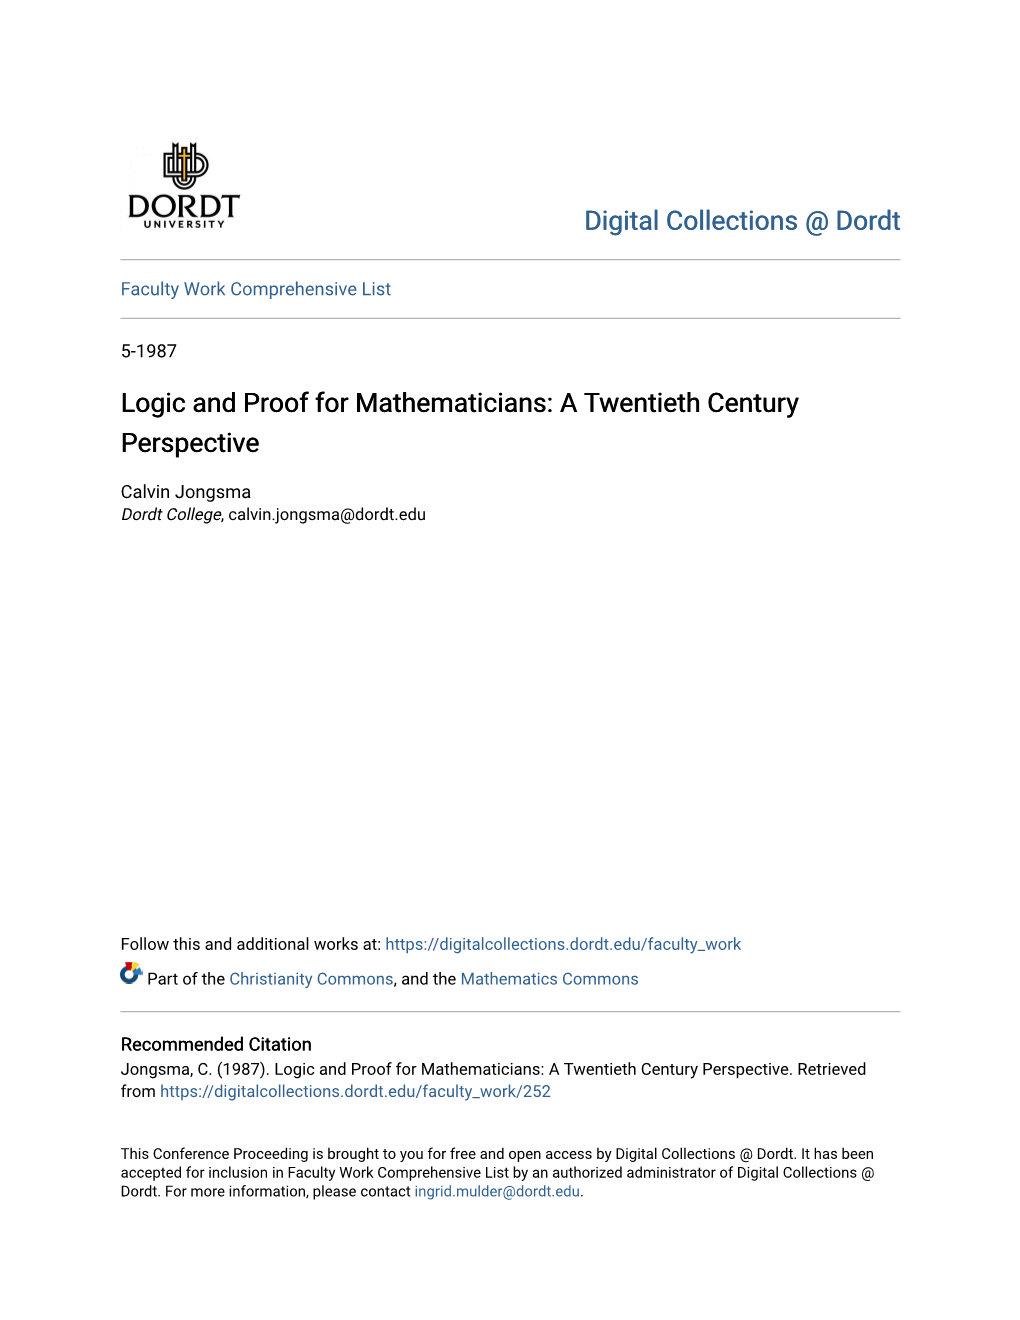 Logic and Proof for Mathematicians: a Twentieth Century Perspective